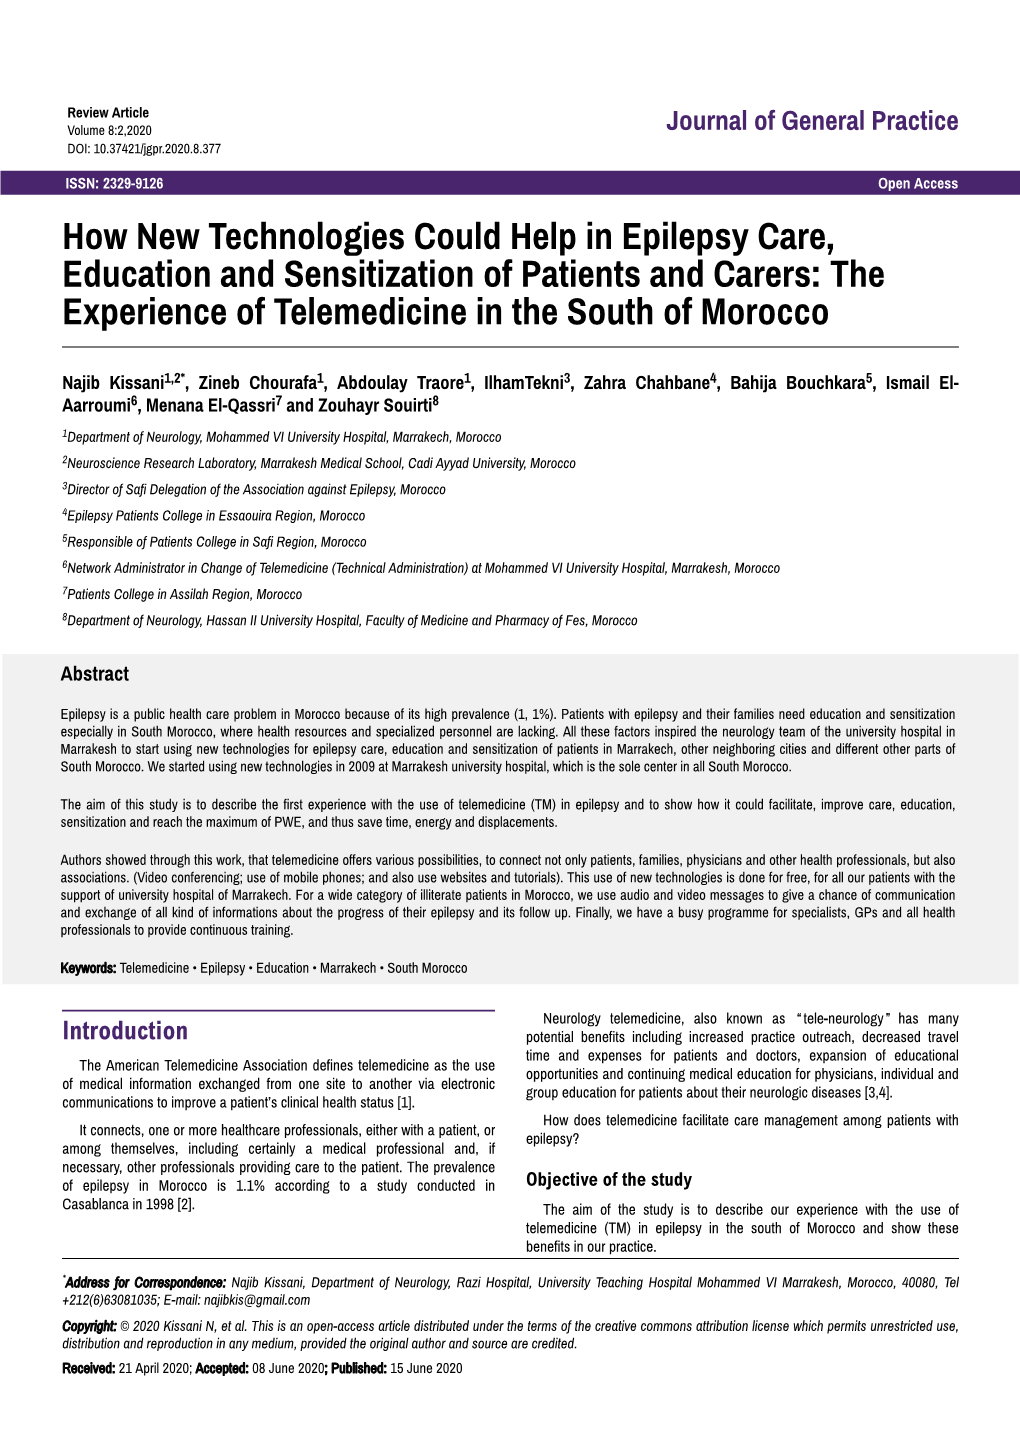 How New Technologies Could Help in Epilepsy Care, Education and Sensitization of Patients and Carers: the Experience of Telemedicine in the South of Morocco